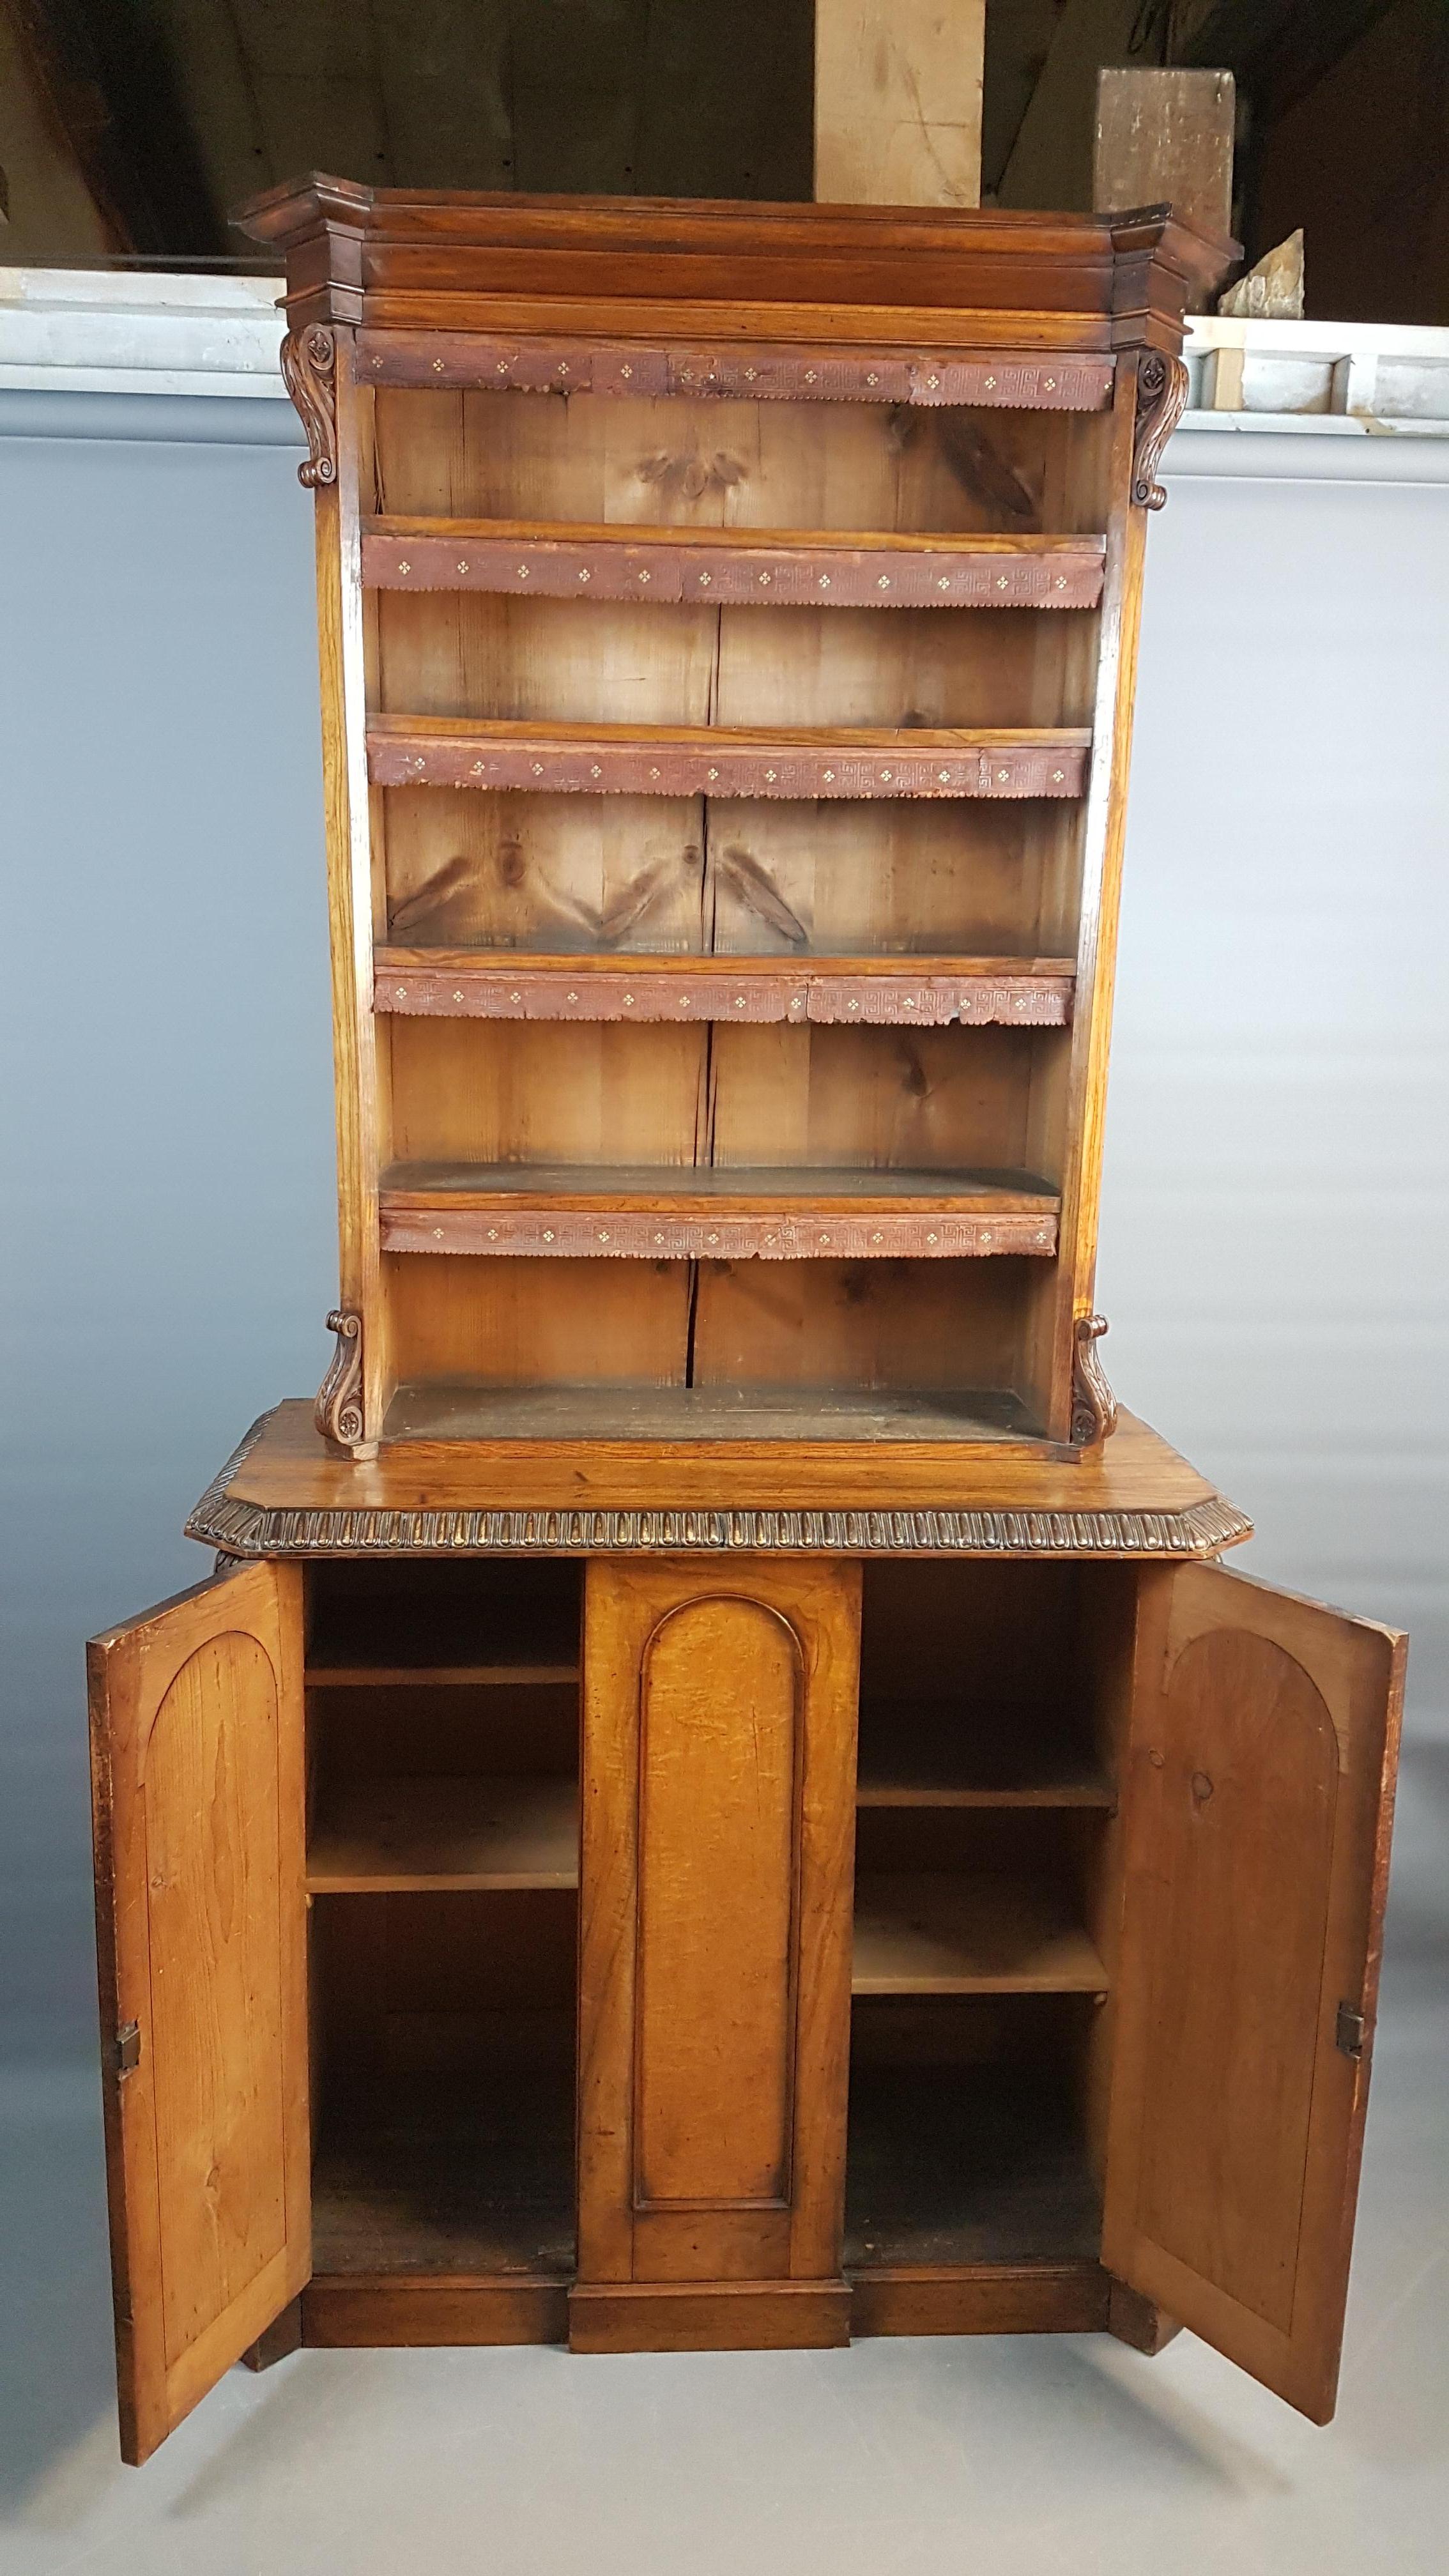 A stunning mid-19th century Irish library cupboard bookcase with subtle breakfront base. This cupboard has utilised a variety of timbers all veneered on pine, the timbers are oak, walnut, figured walnut and bird's-eye maple. The top and base have